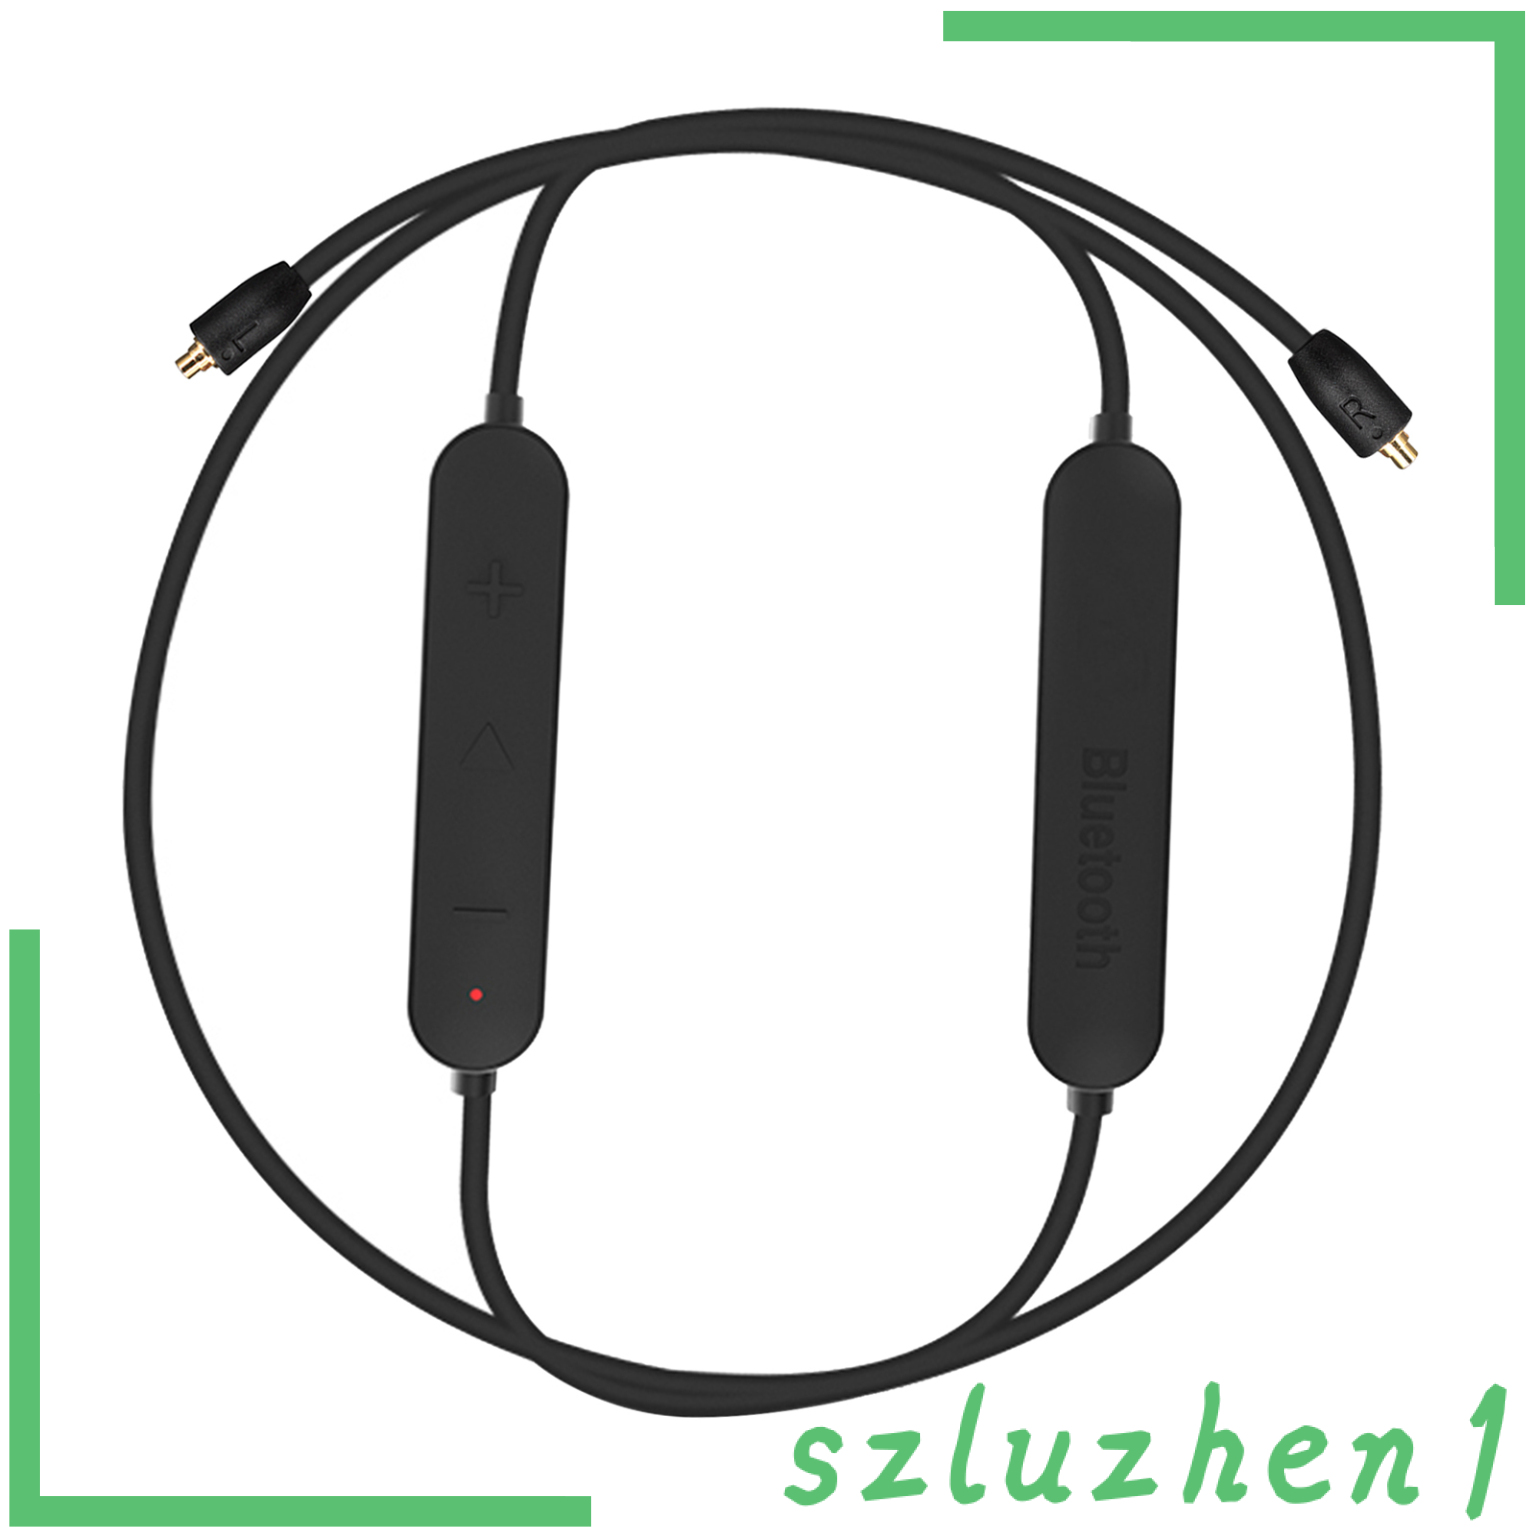 [Hi-tech] Bluetooth Module 4.2 Wireless Upgrade Cable Replaces for KZ